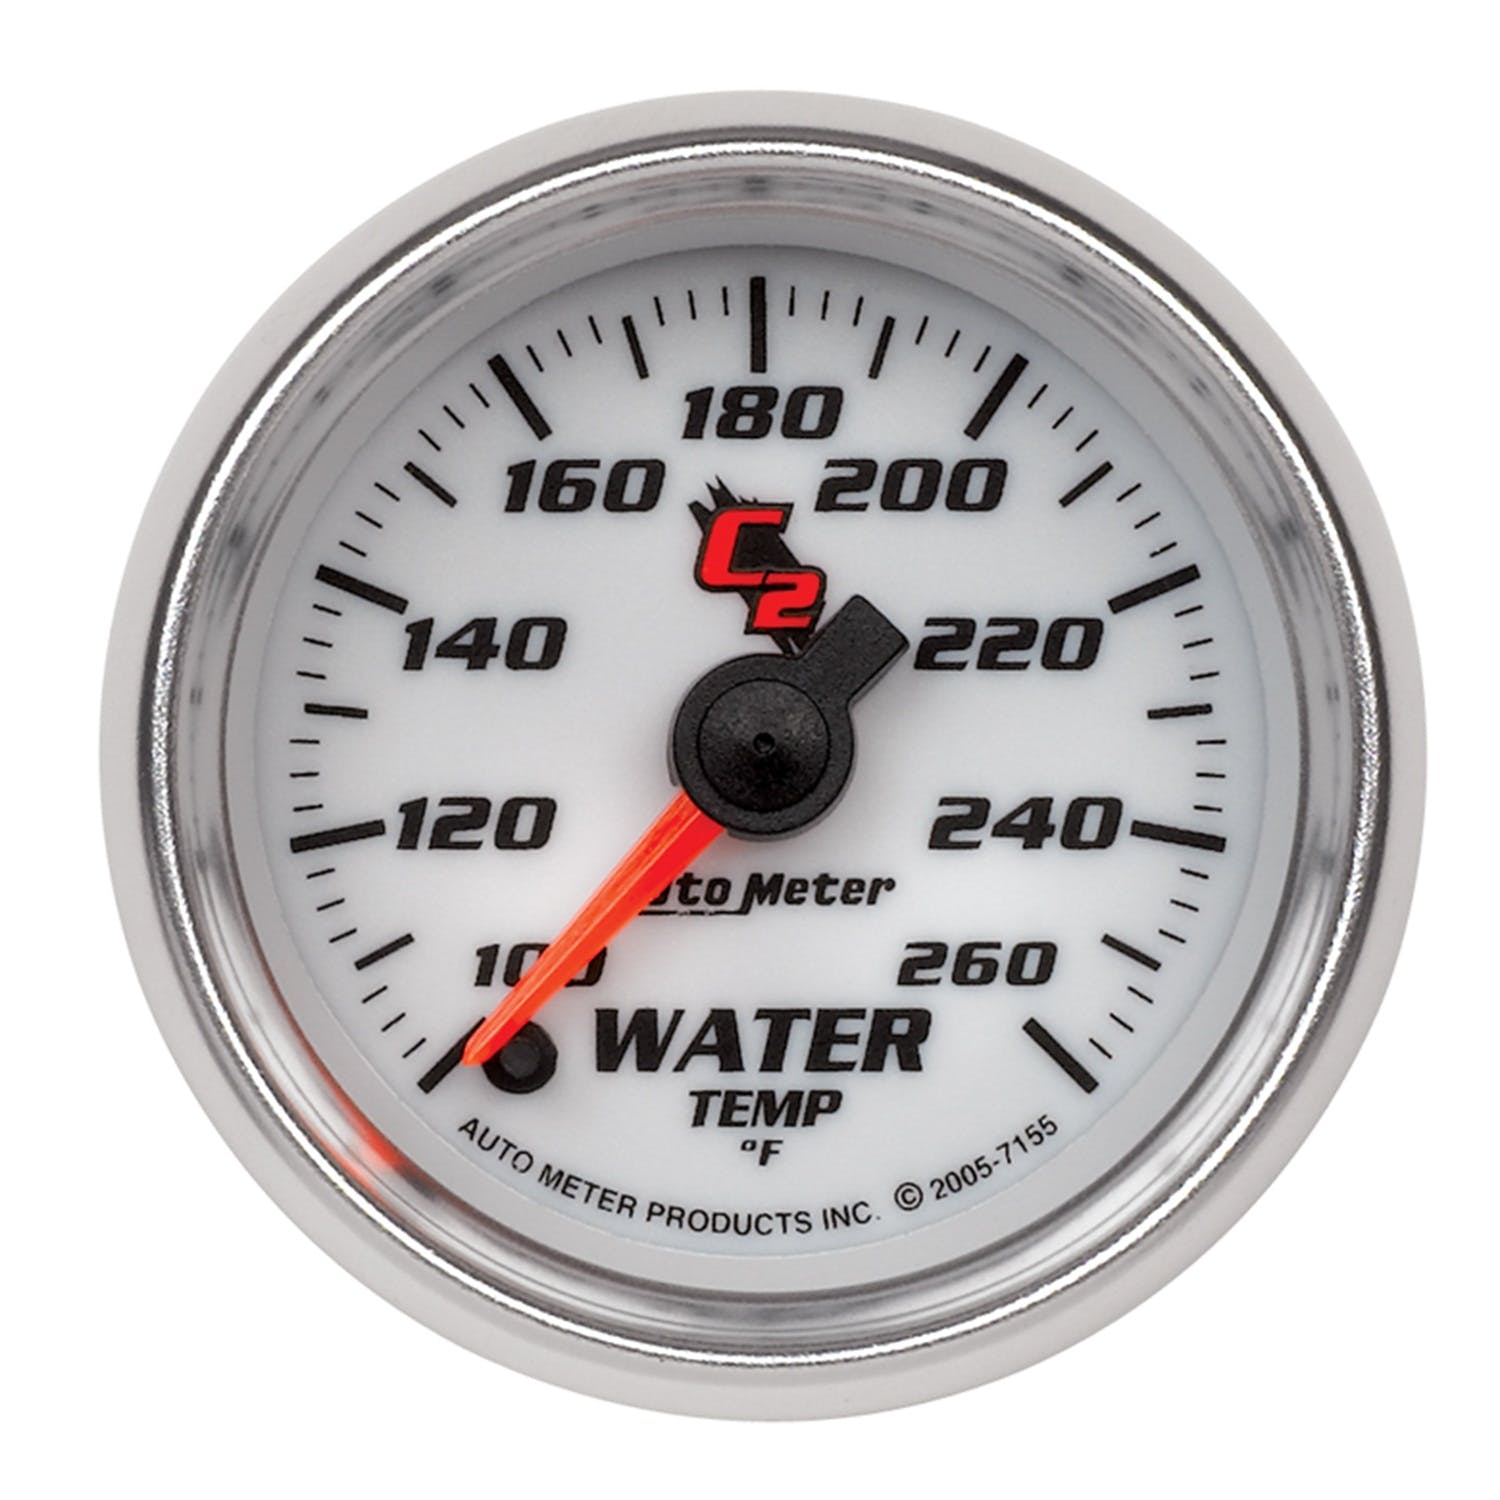 AutoMeter Products 7155 Water Temp 100-260 F